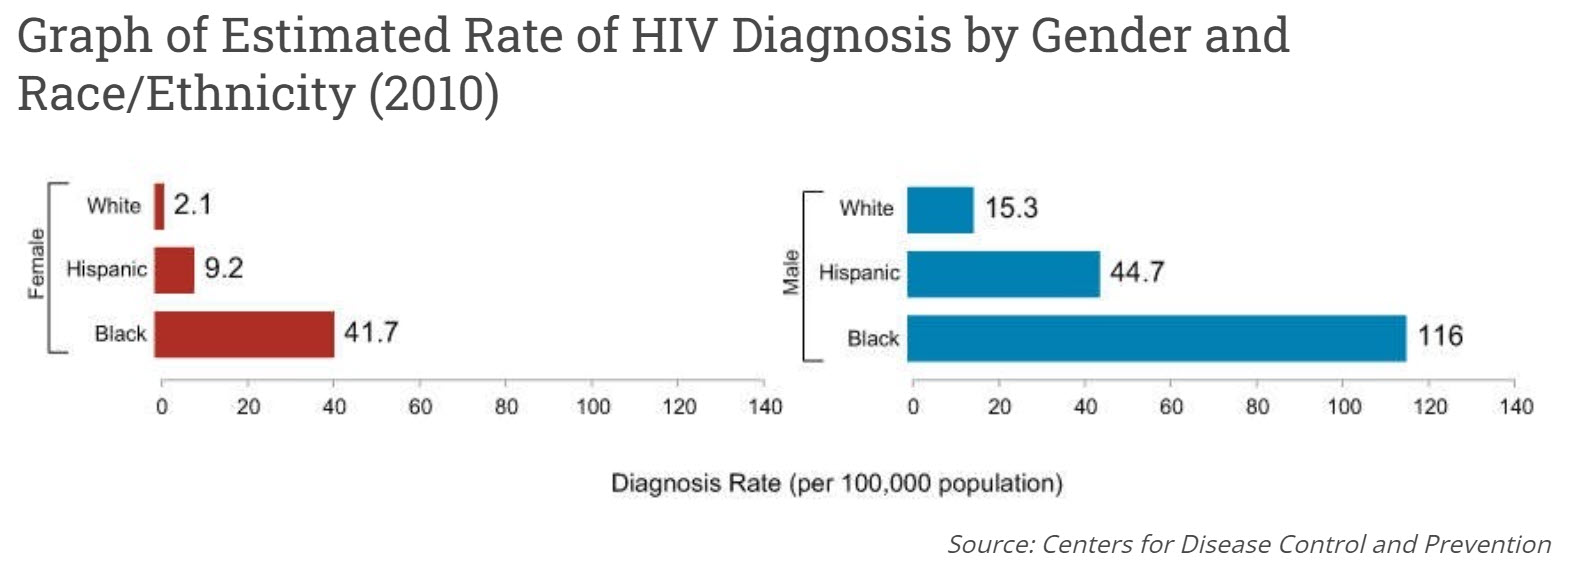 Rate of HIV Diagnosis by Gender and Race, 2010